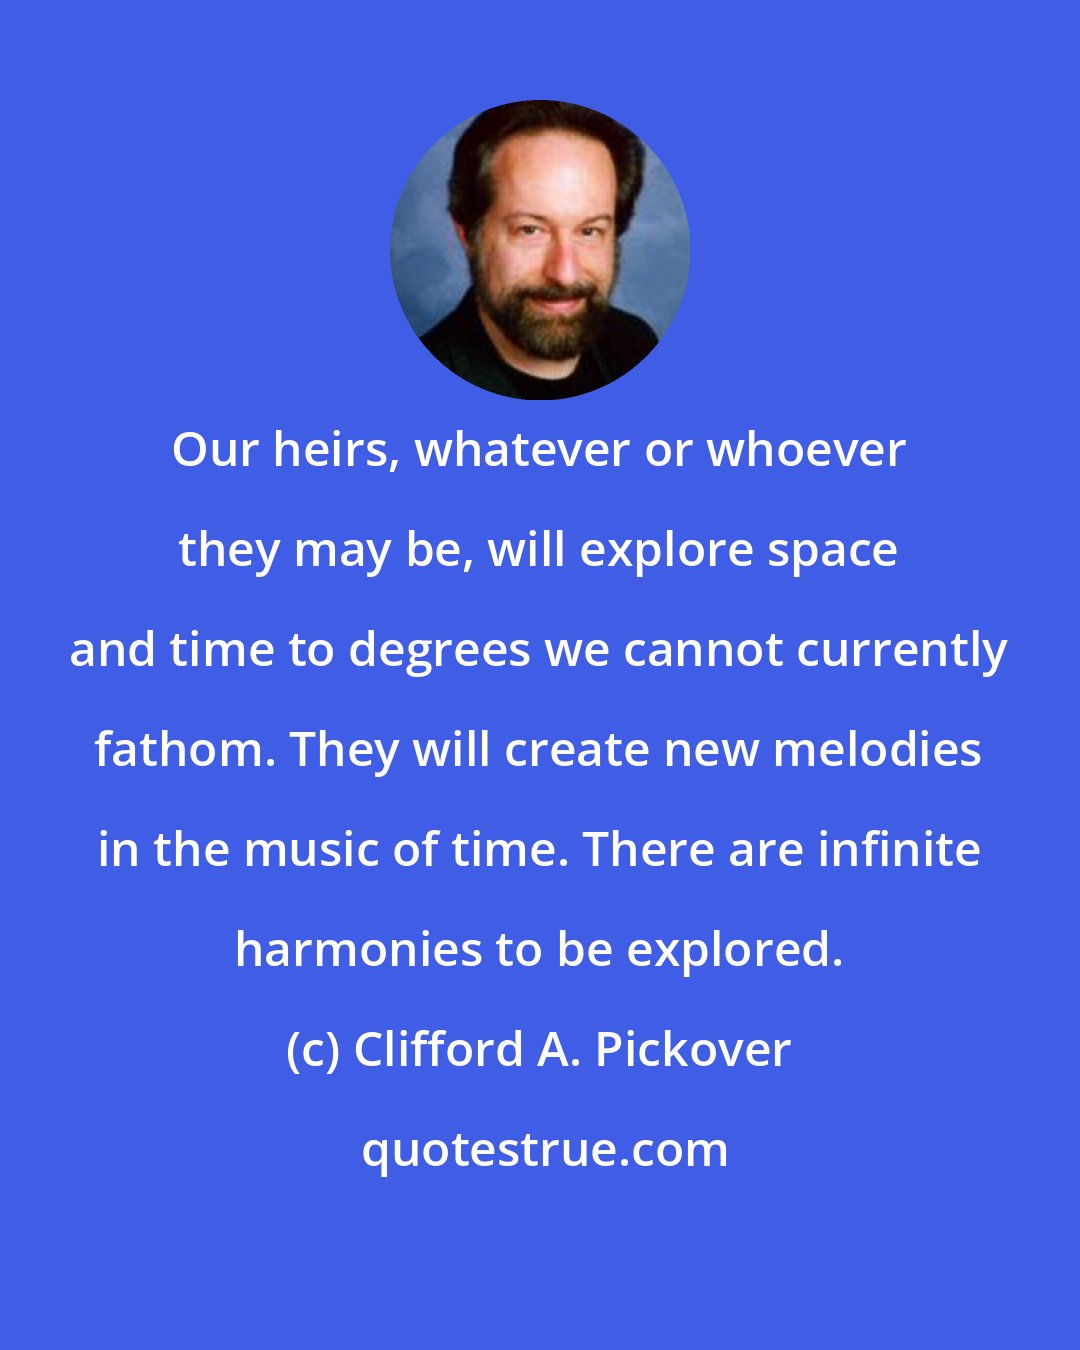 Clifford A. Pickover: Our heirs, whatever or whoever they may be, will explore space and time to degrees we cannot currently fathom. They will create new melodies in the music of time. There are infinite harmonies to be explored.